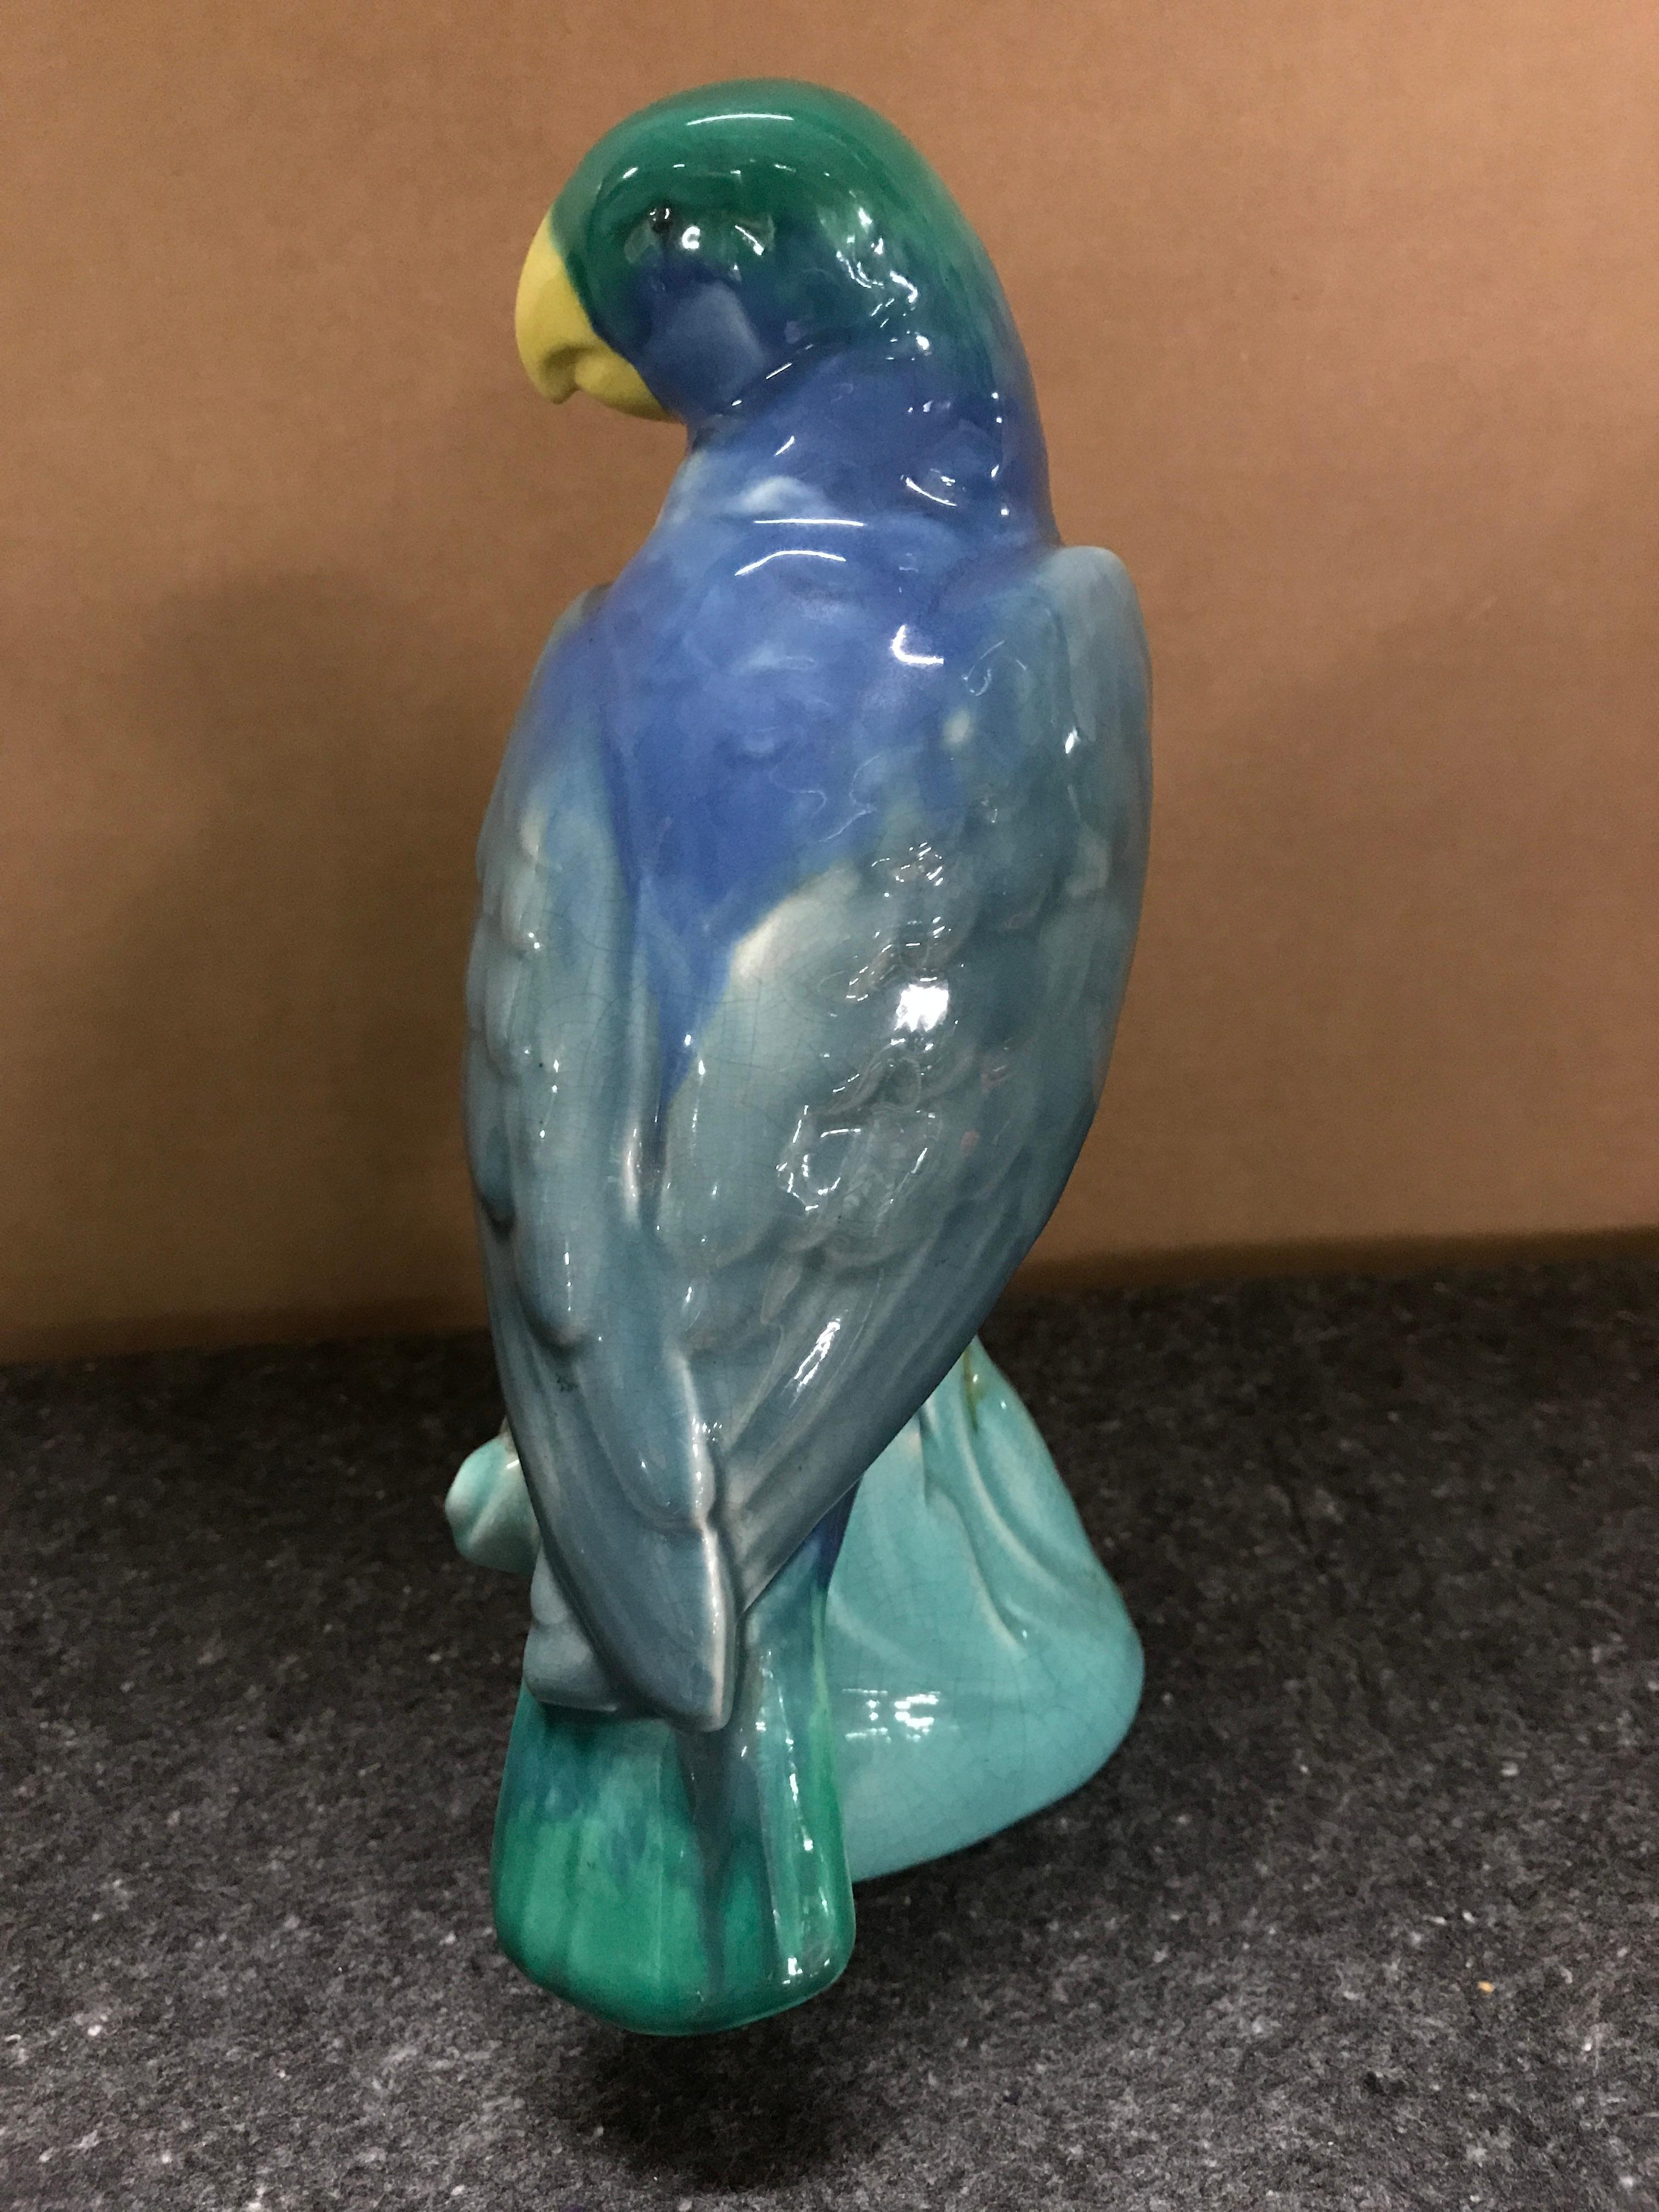 Pair of English Majolica Parrot Figures by Mintons im Zustand „Gut“ im Angebot in Oaks, PA